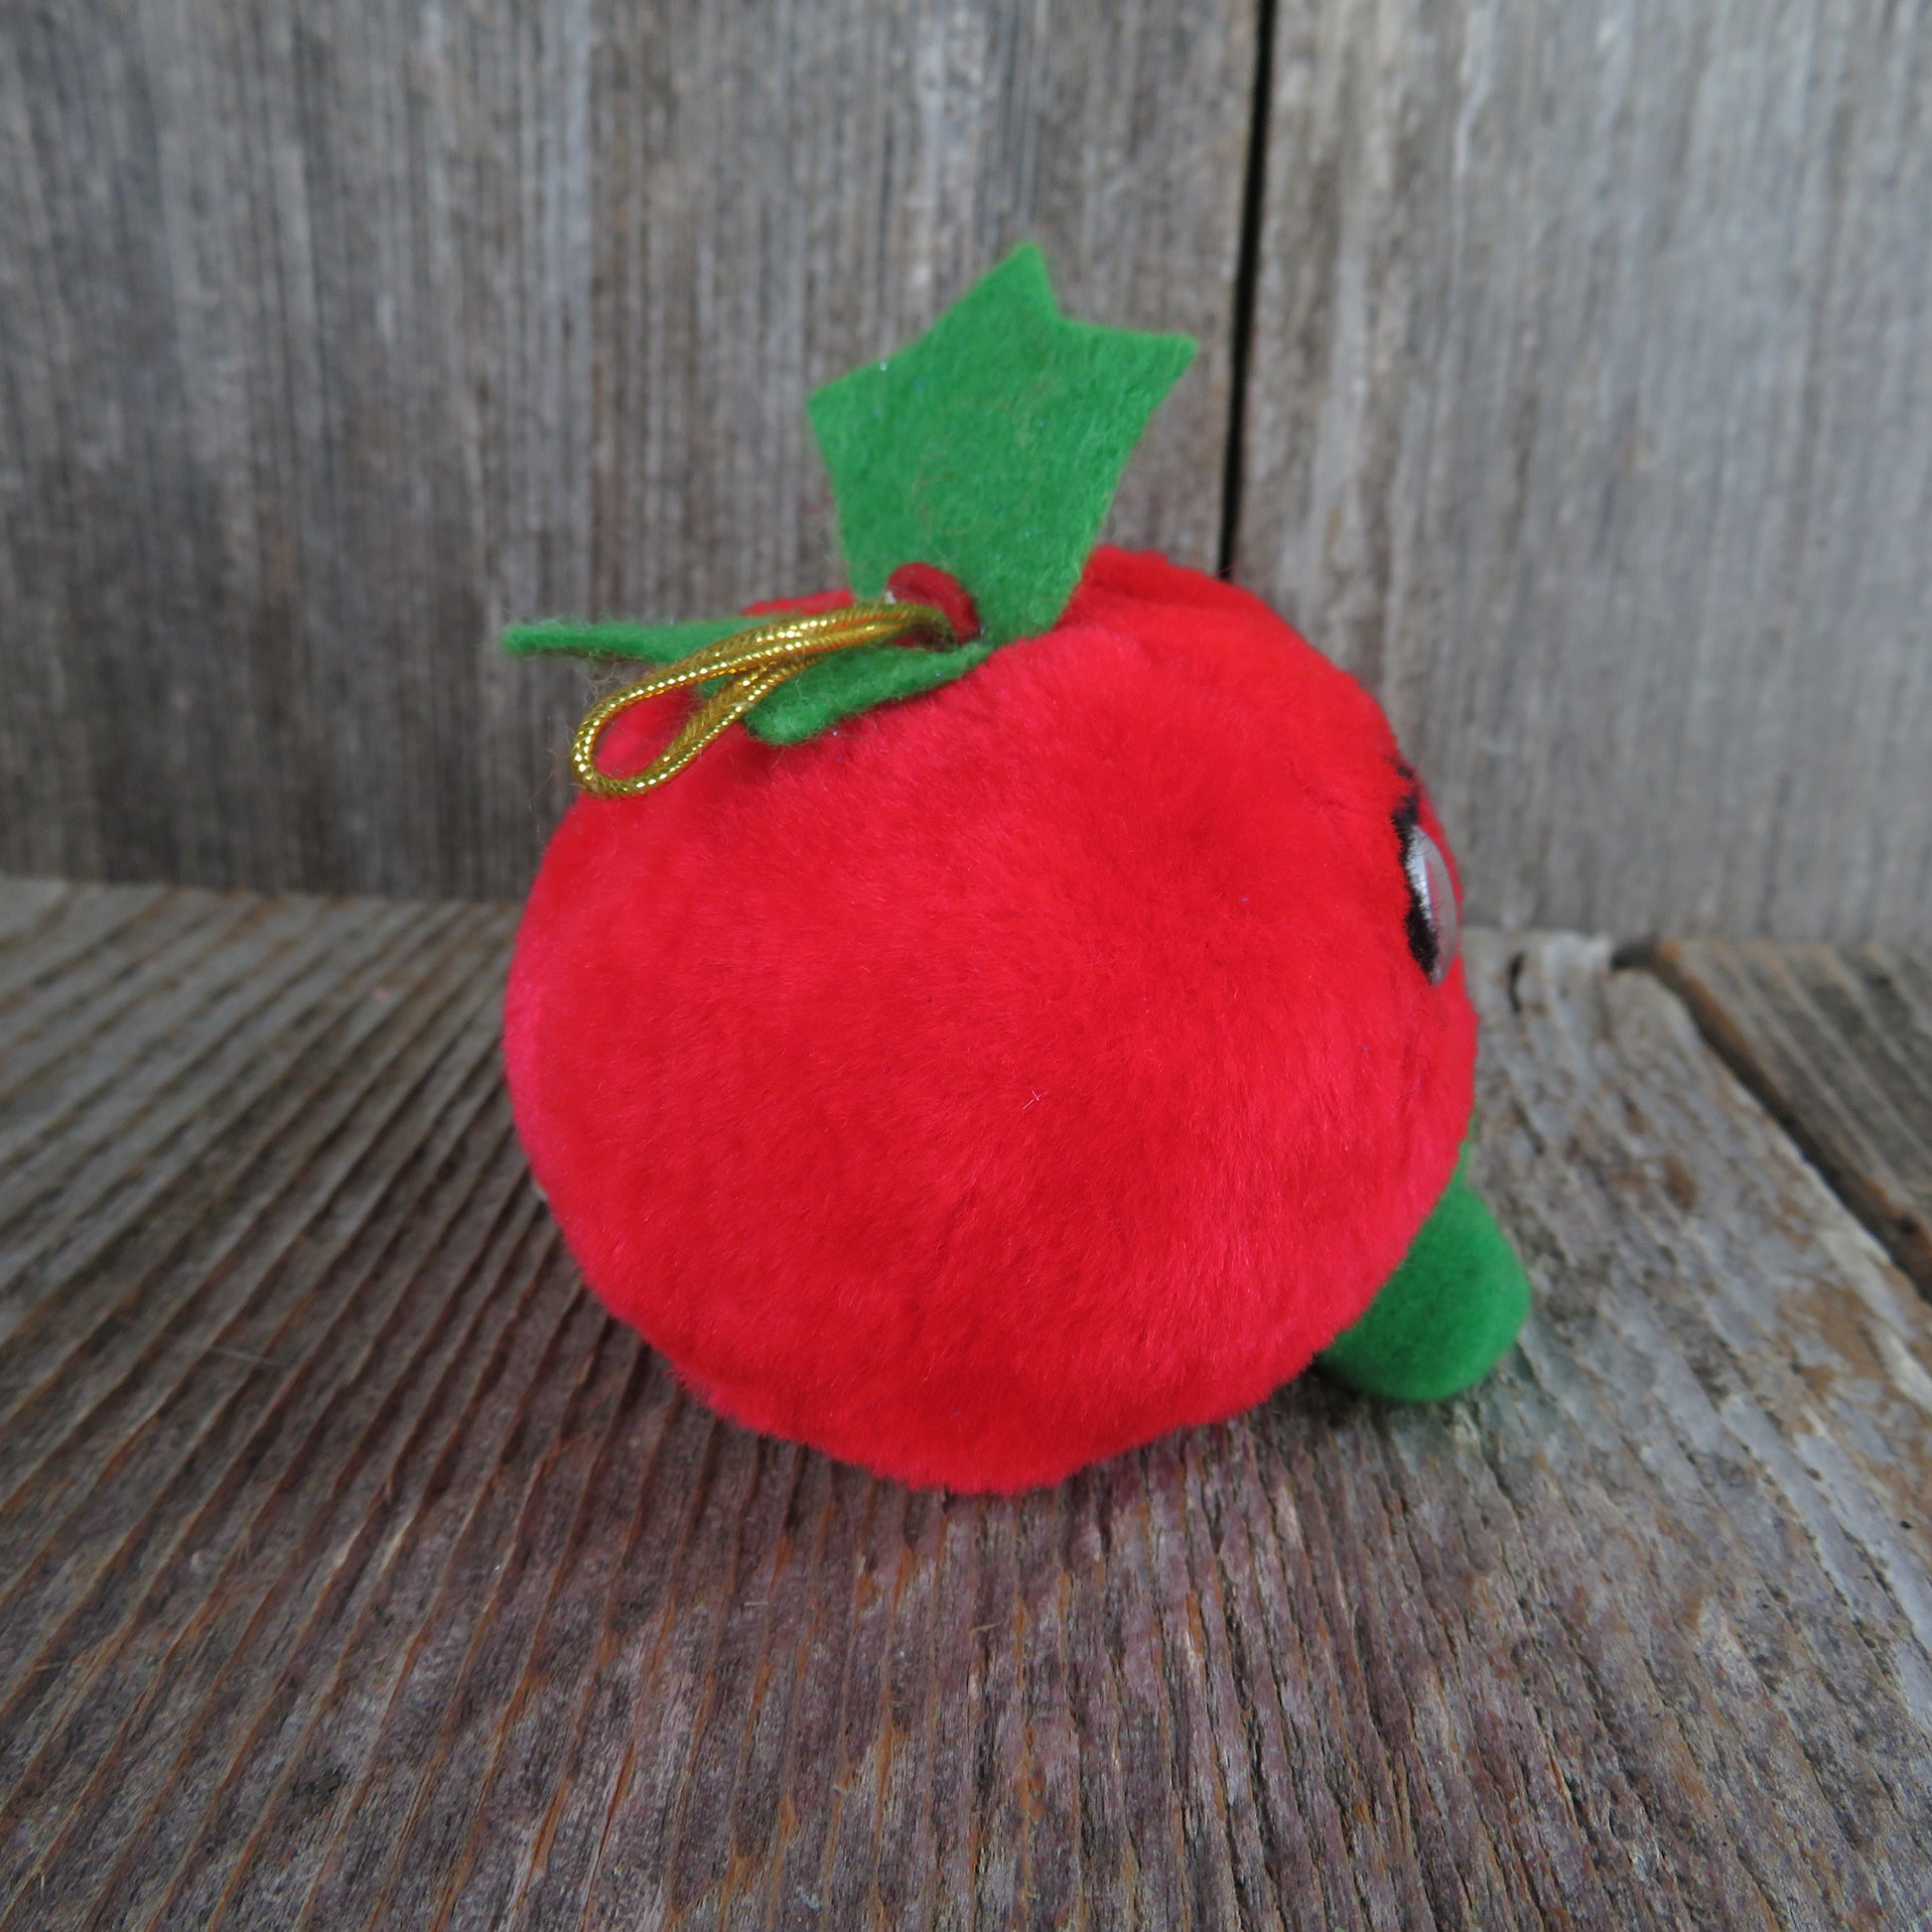 Vintage Tomato Ornament Plush Christmas Yumkins Del Monte Fruit and Vegetables 1991 Red - At Grandma's Table